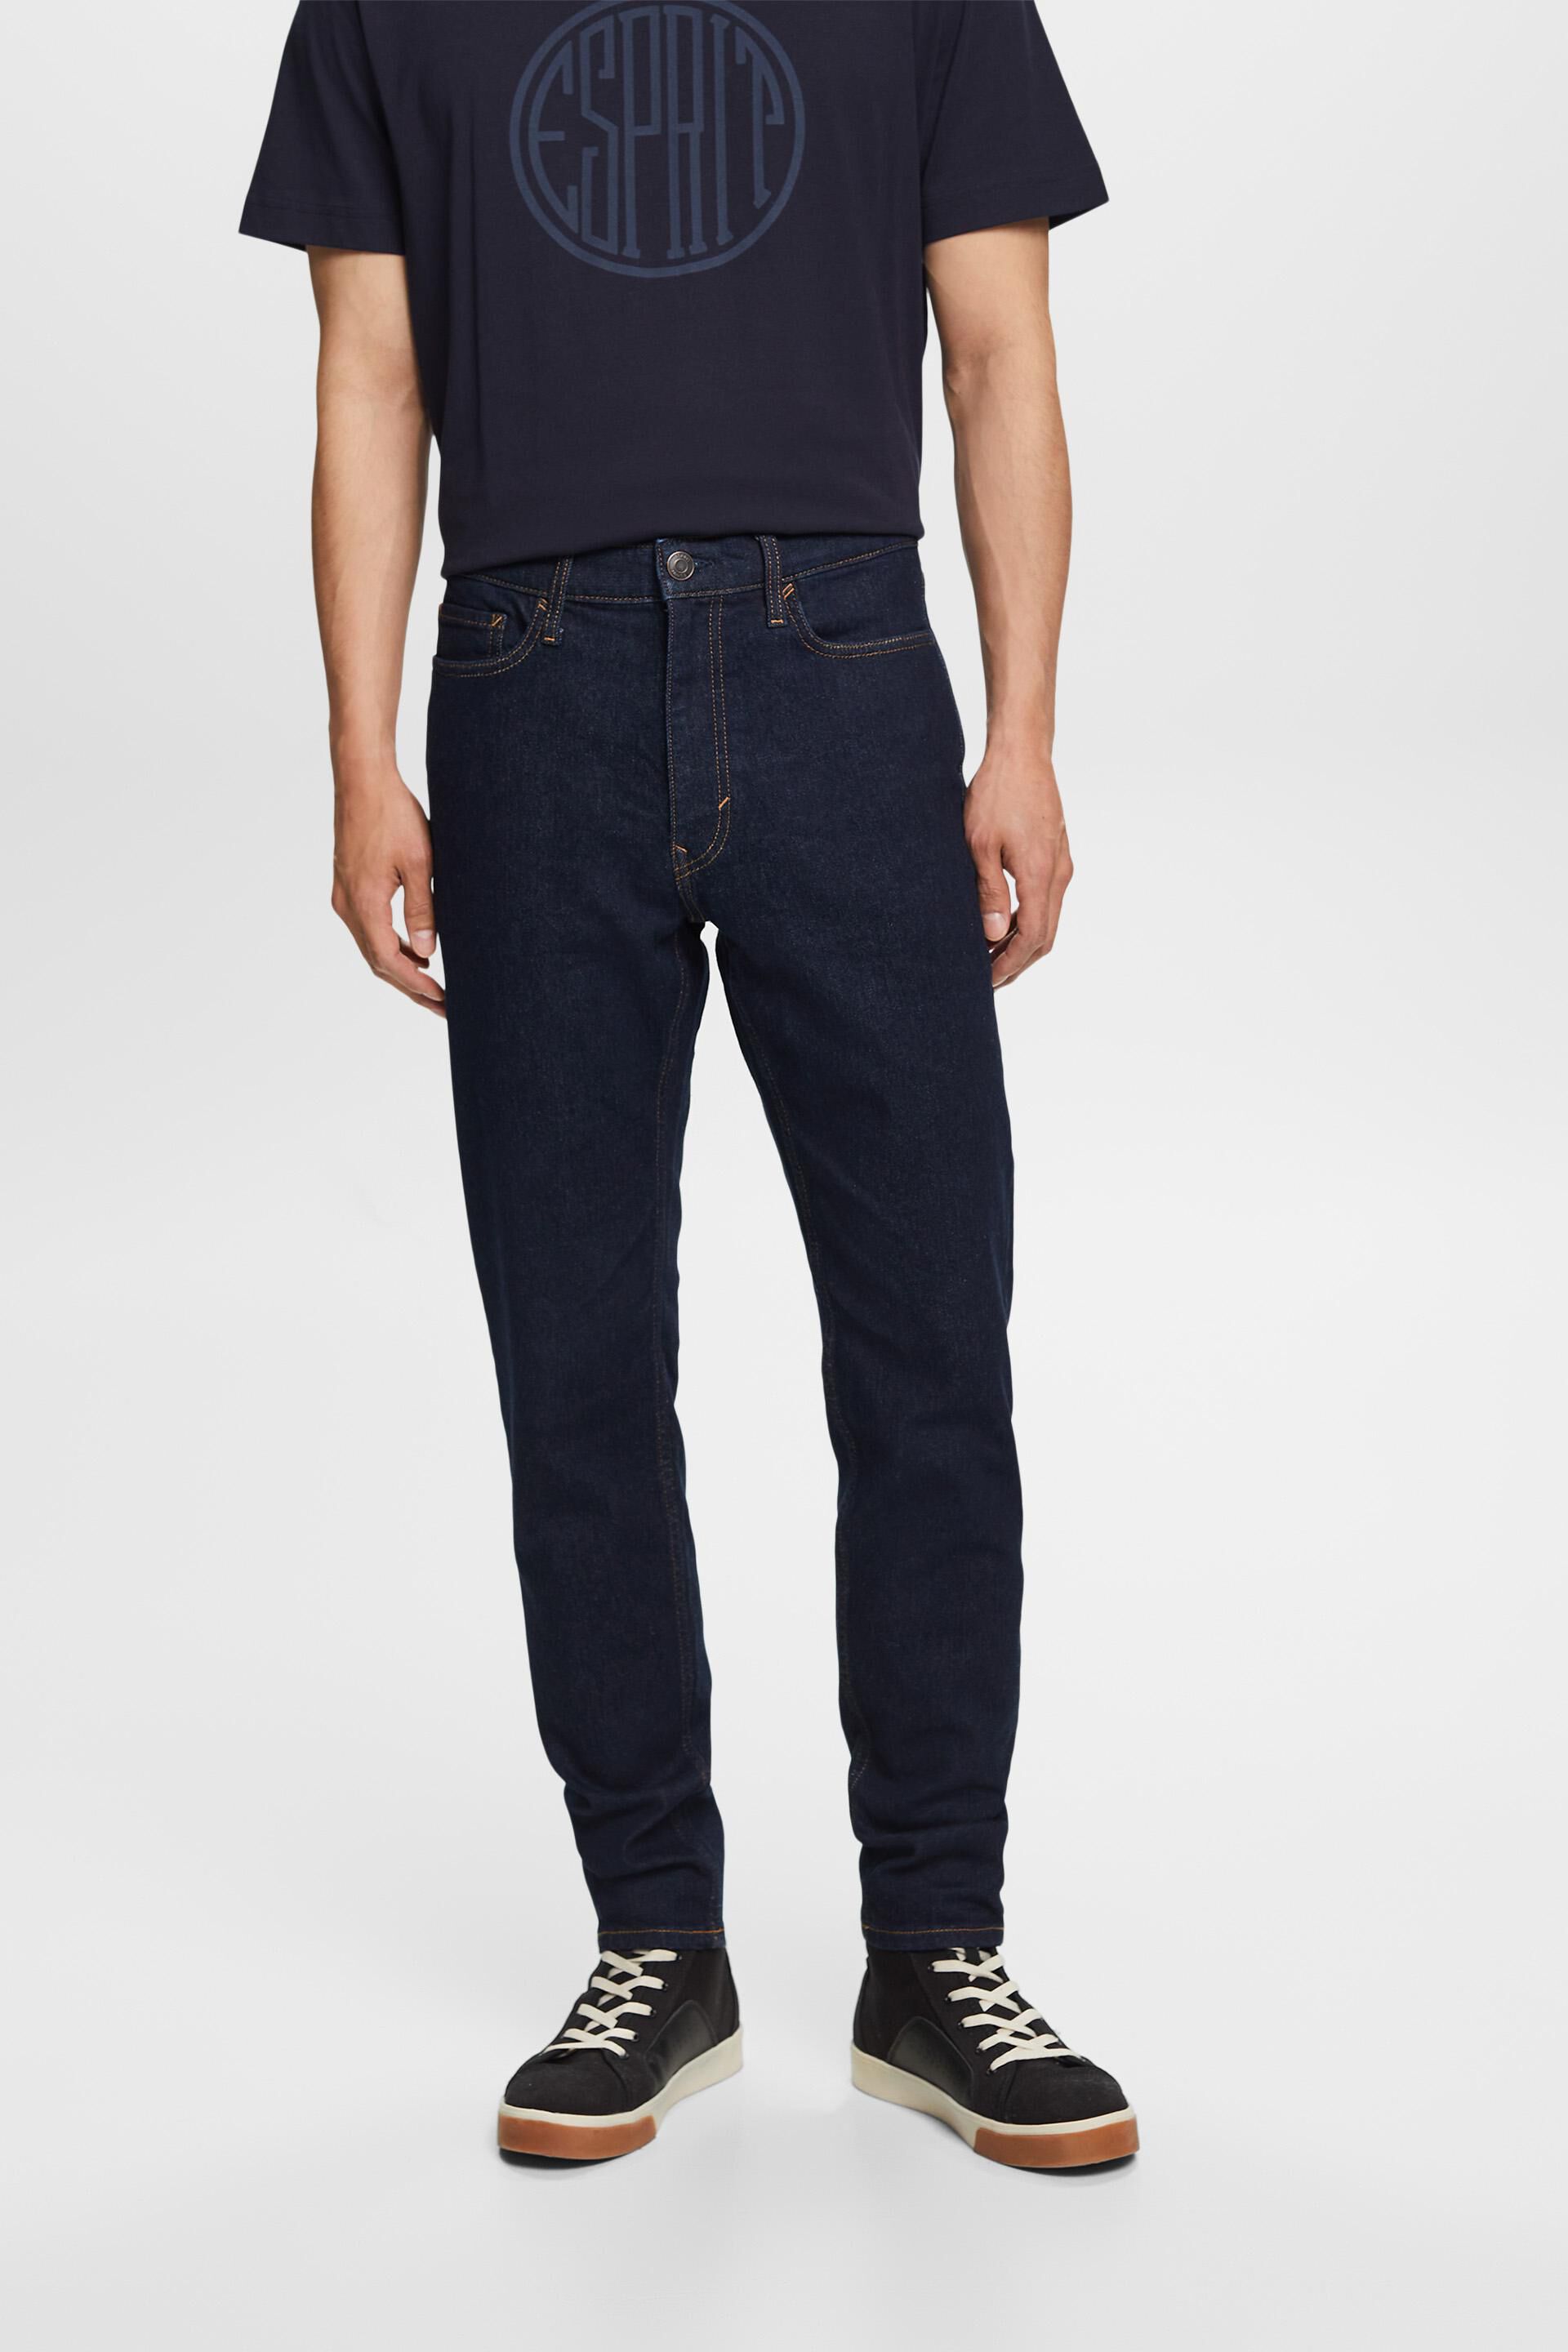 Esprit Tapered fit jeans